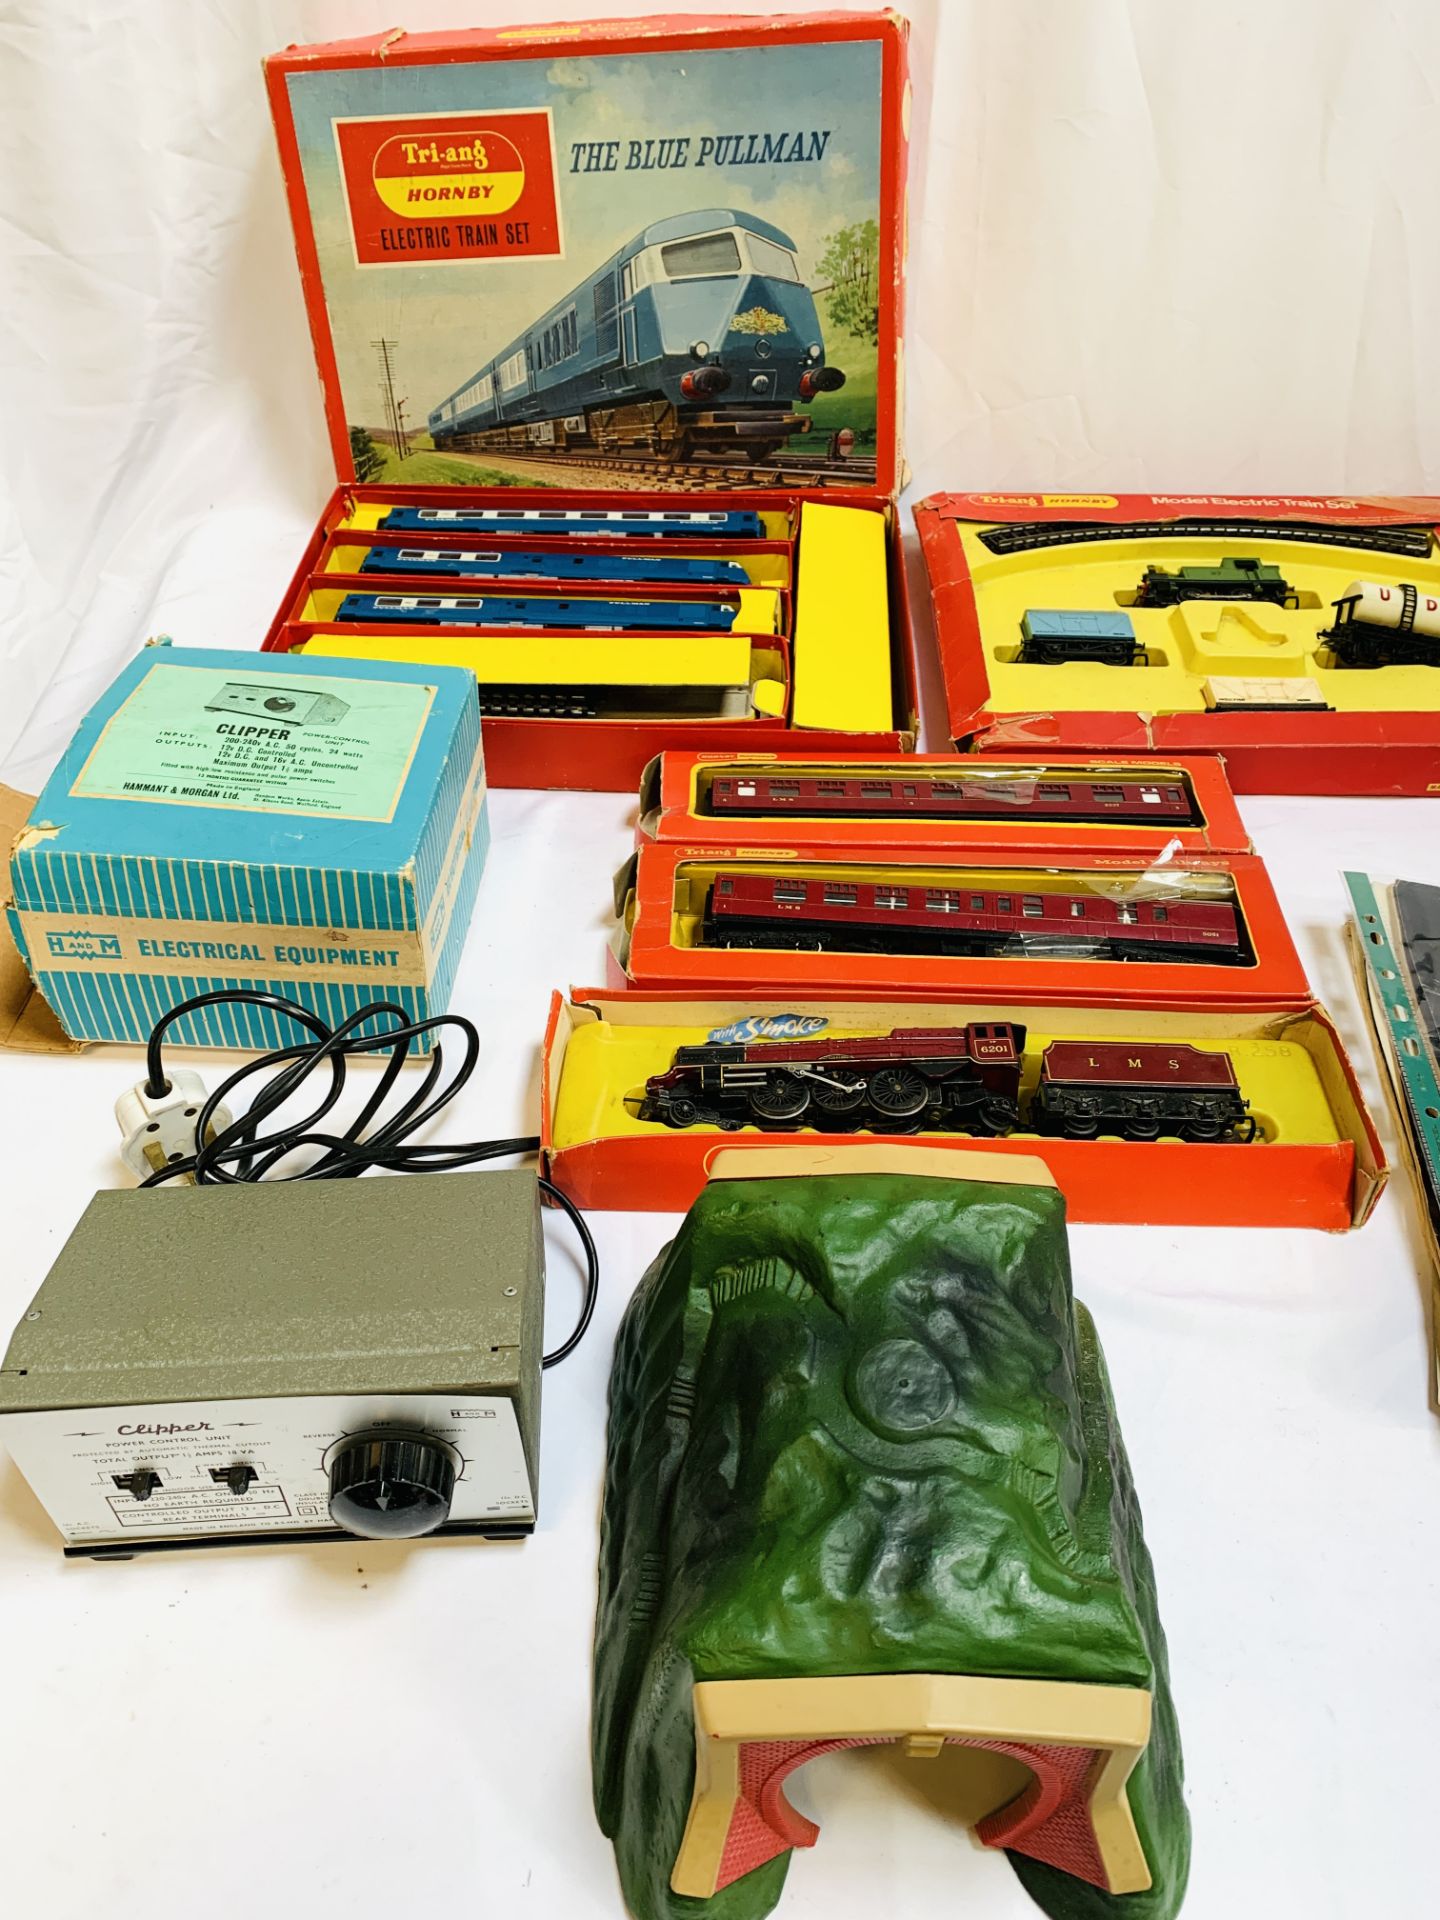 Collection of Tri-ang Hornby OO model trains